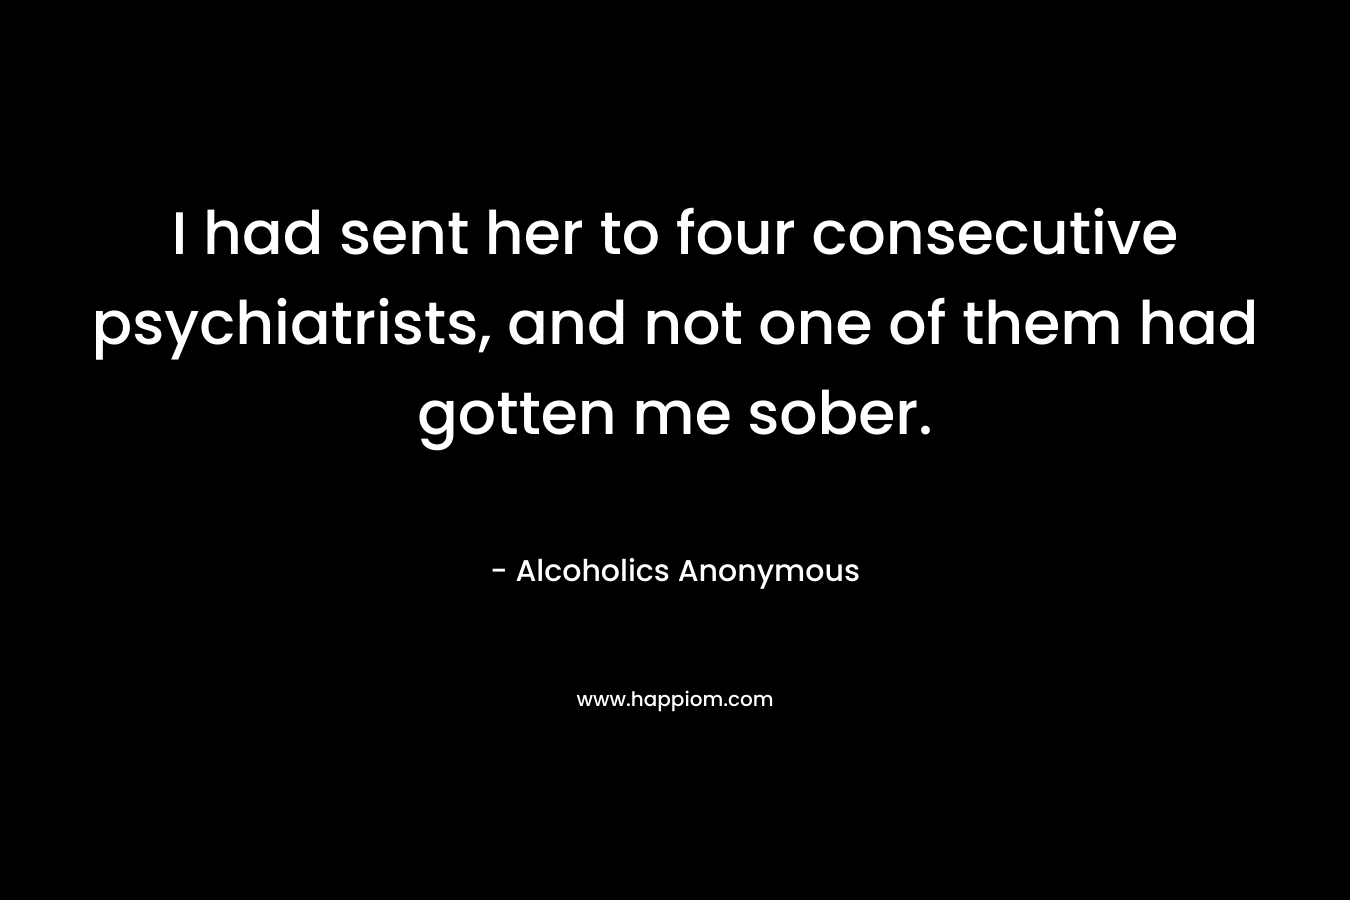 I had sent her to four consecutive psychiatrists, and not one of them had gotten me sober.